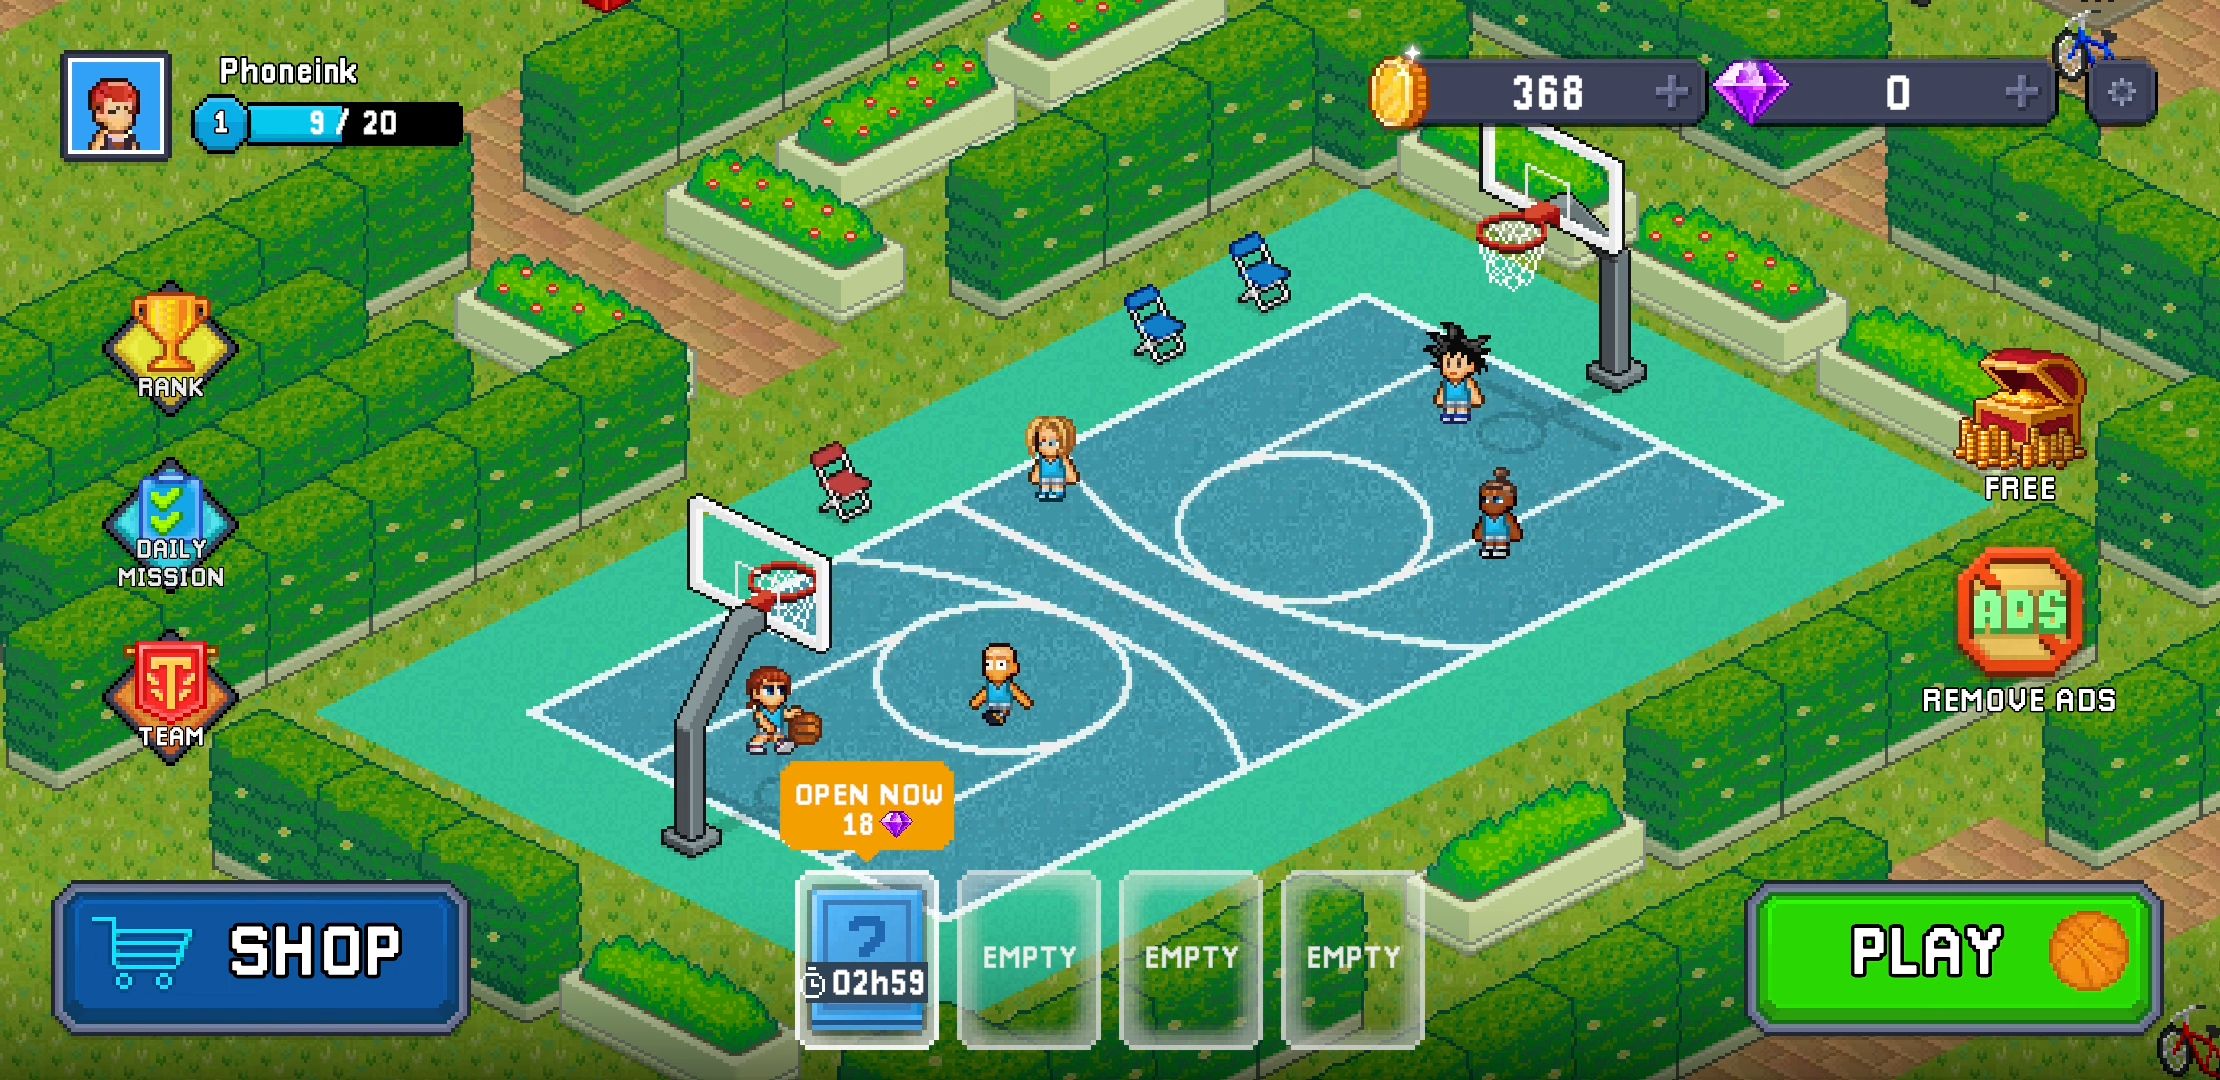 Pixel Basketball: Multiplayer for Android